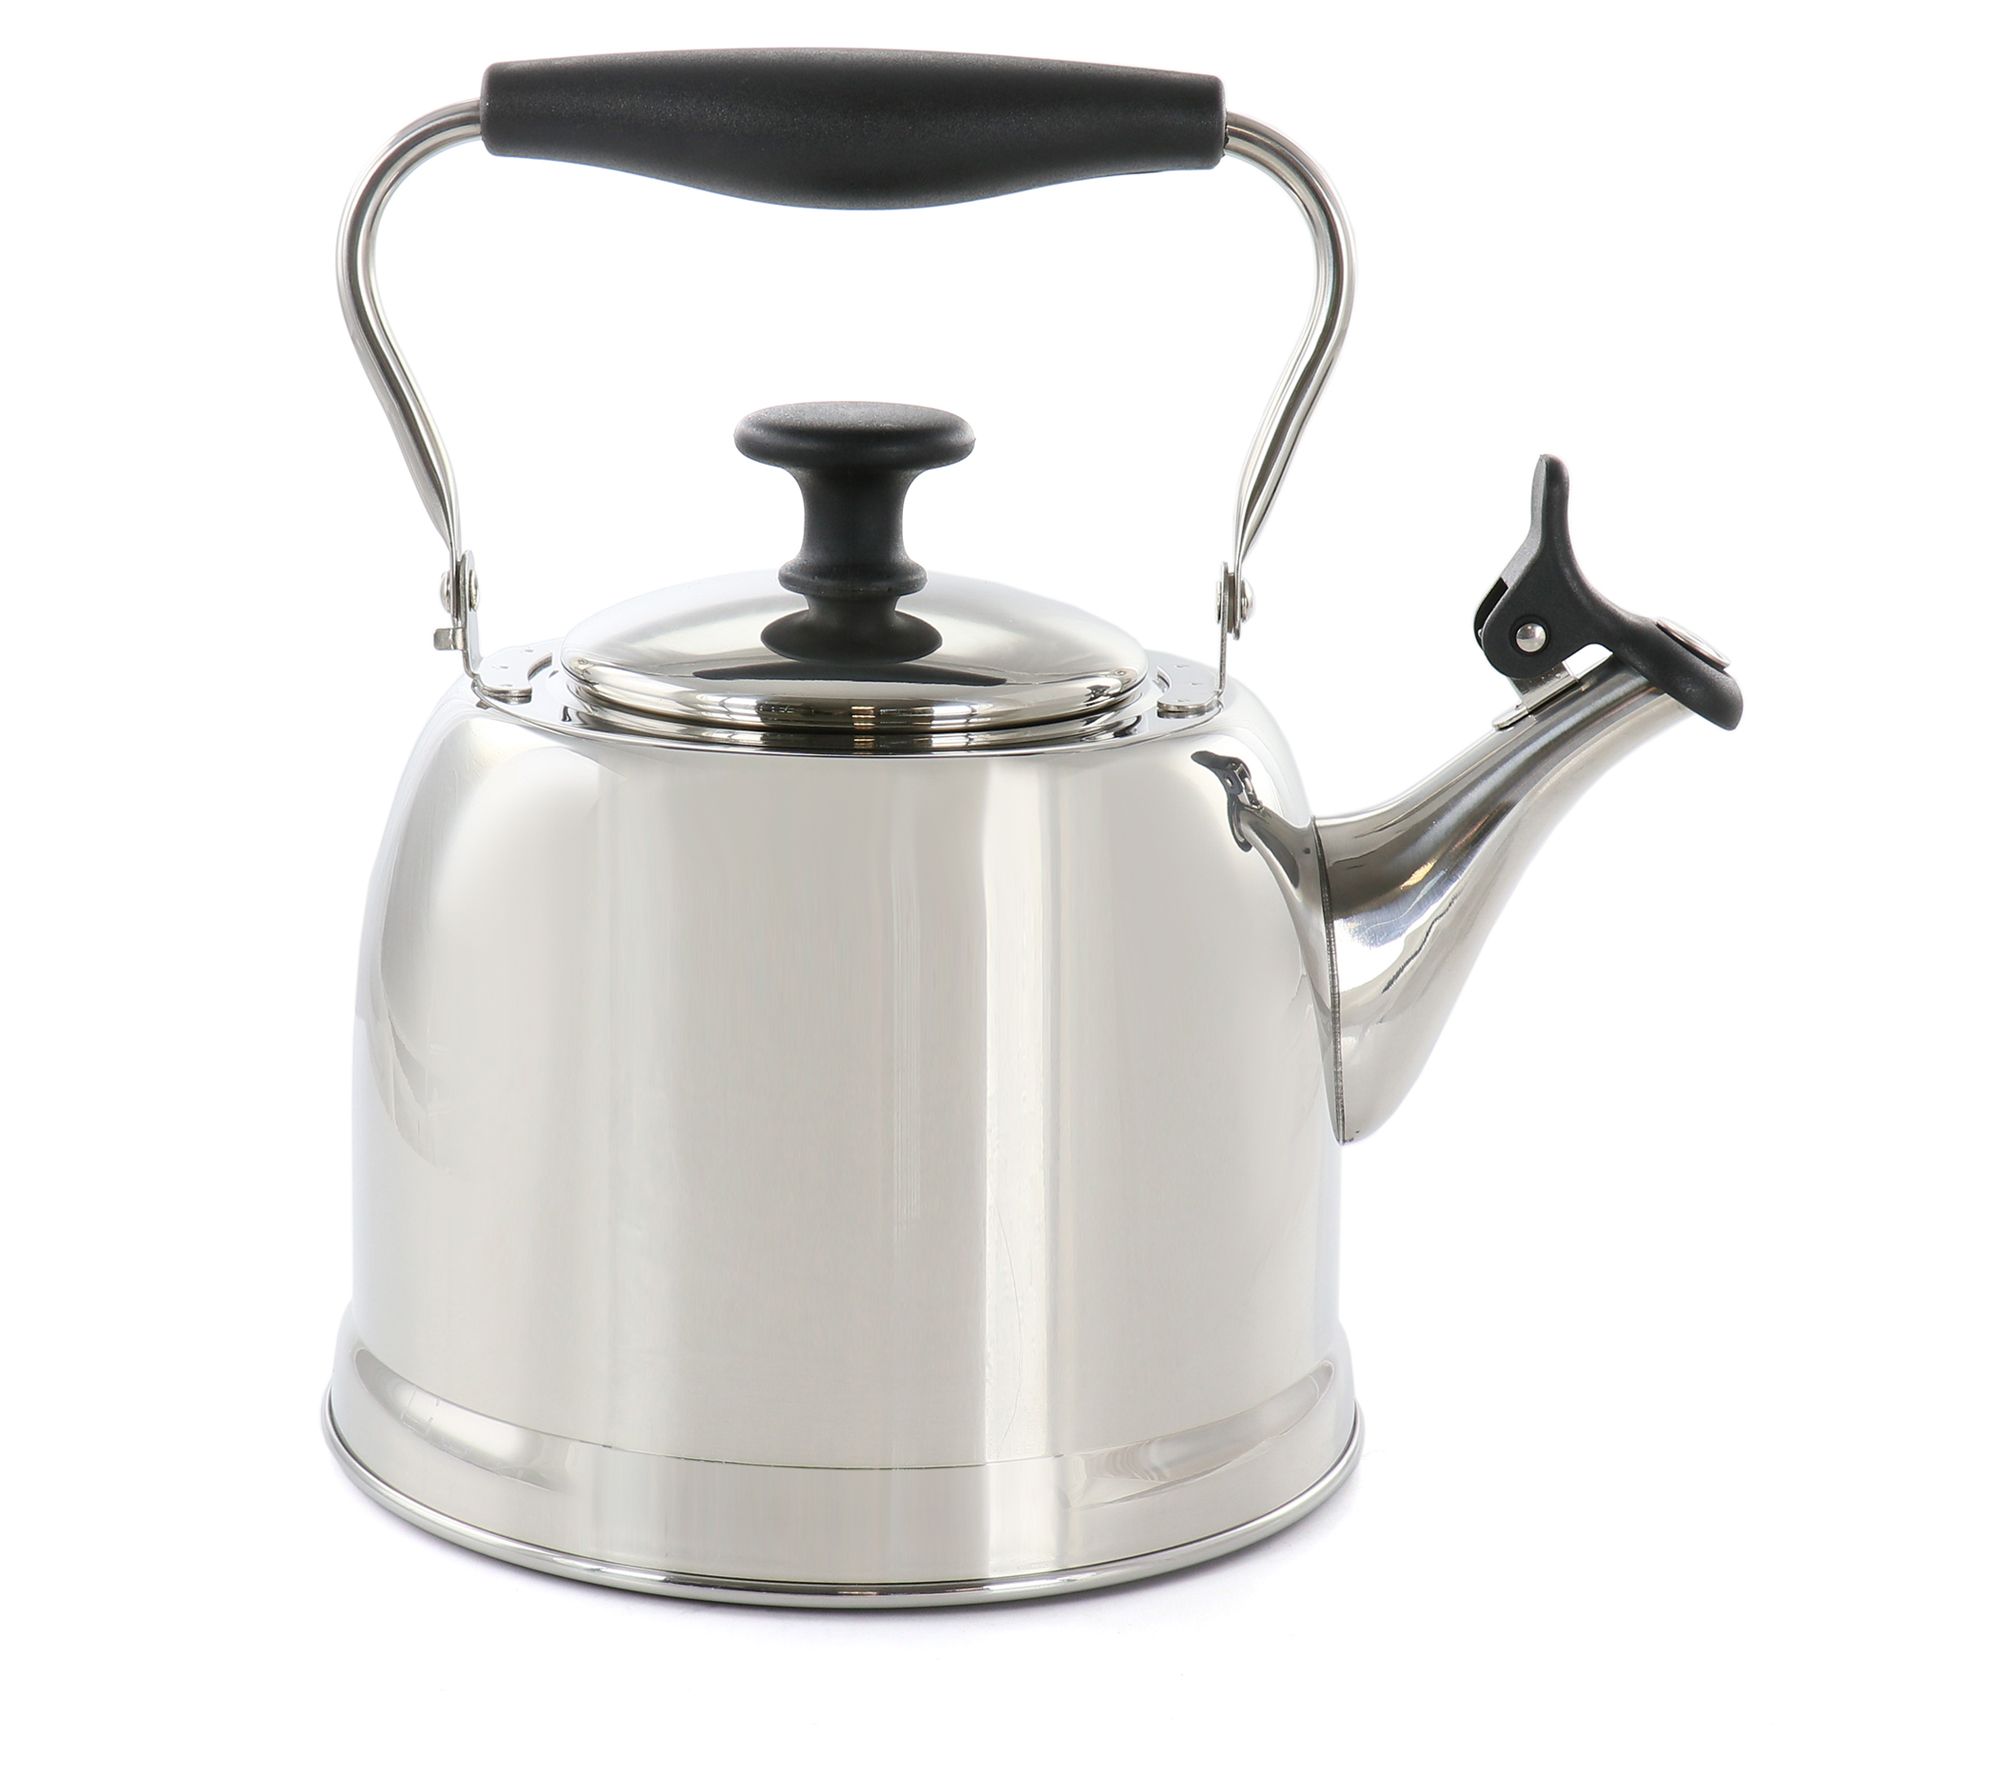 Nordic Ware Full Size Stovetop Kettle Smoker - 9533070